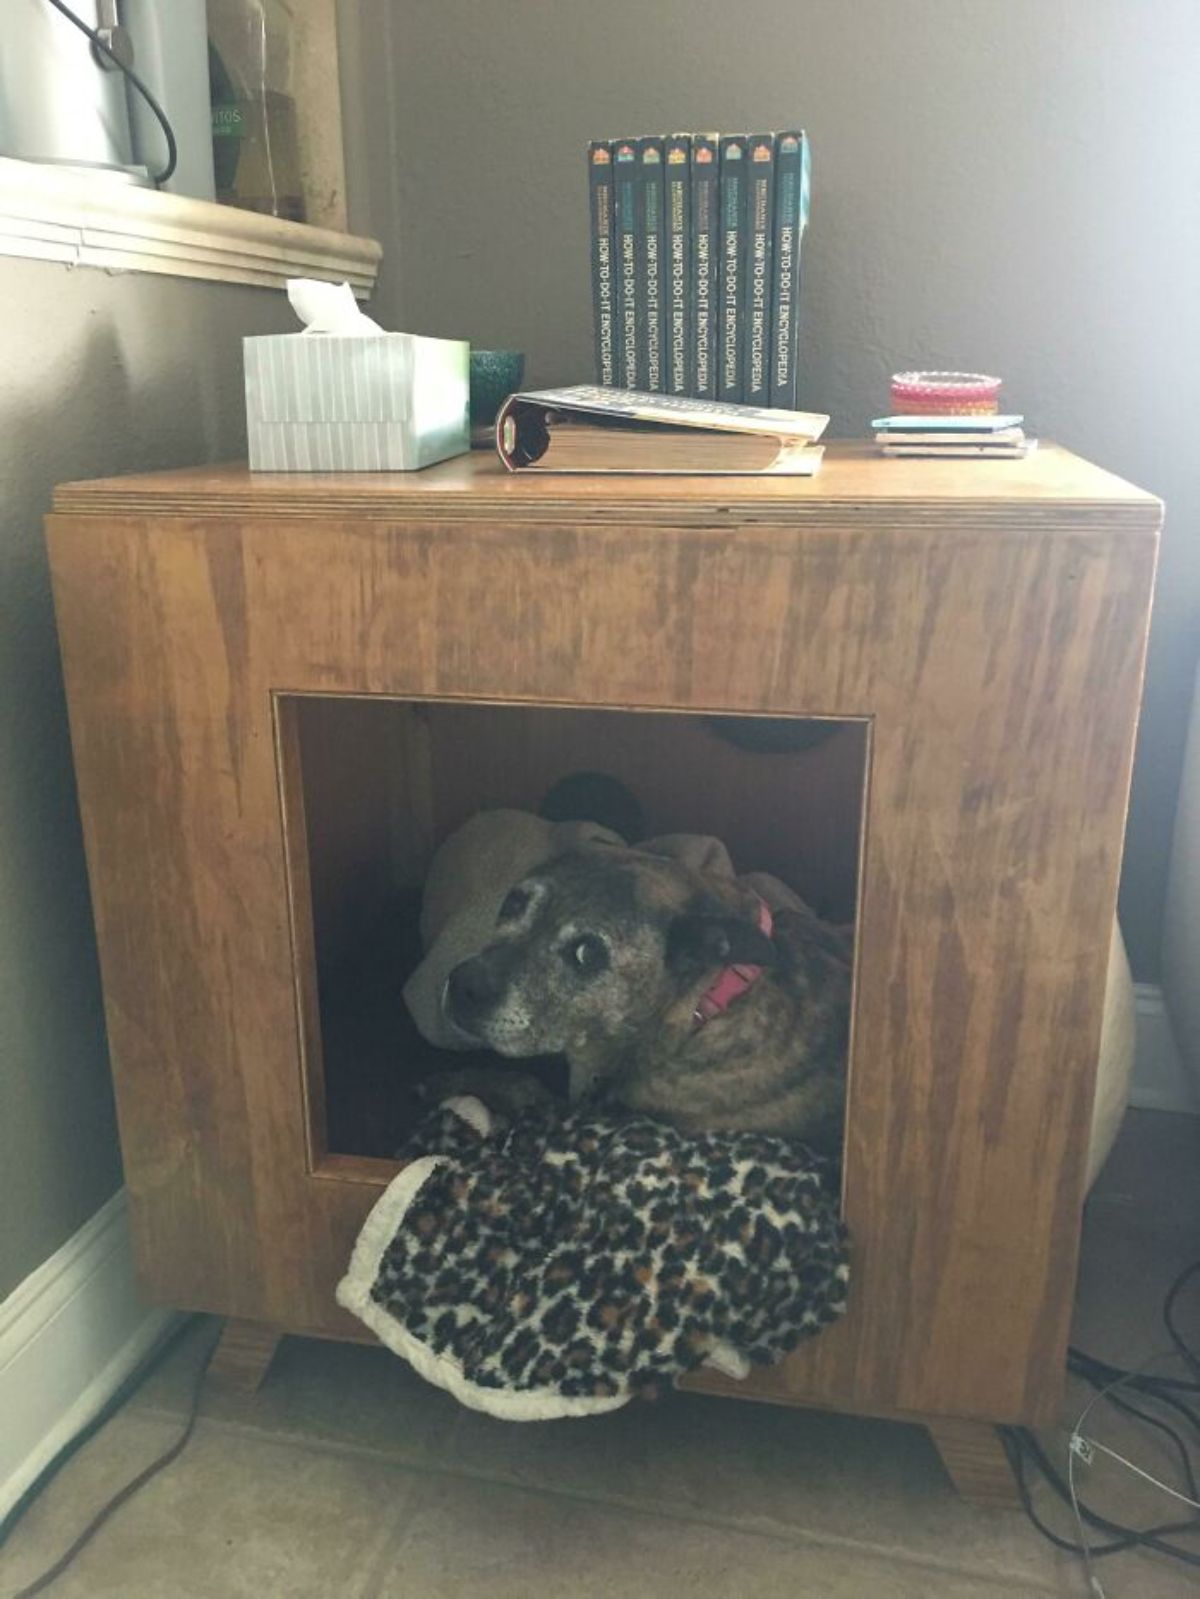 black and brown dog laying in a cubby hole in a table with blankets in it